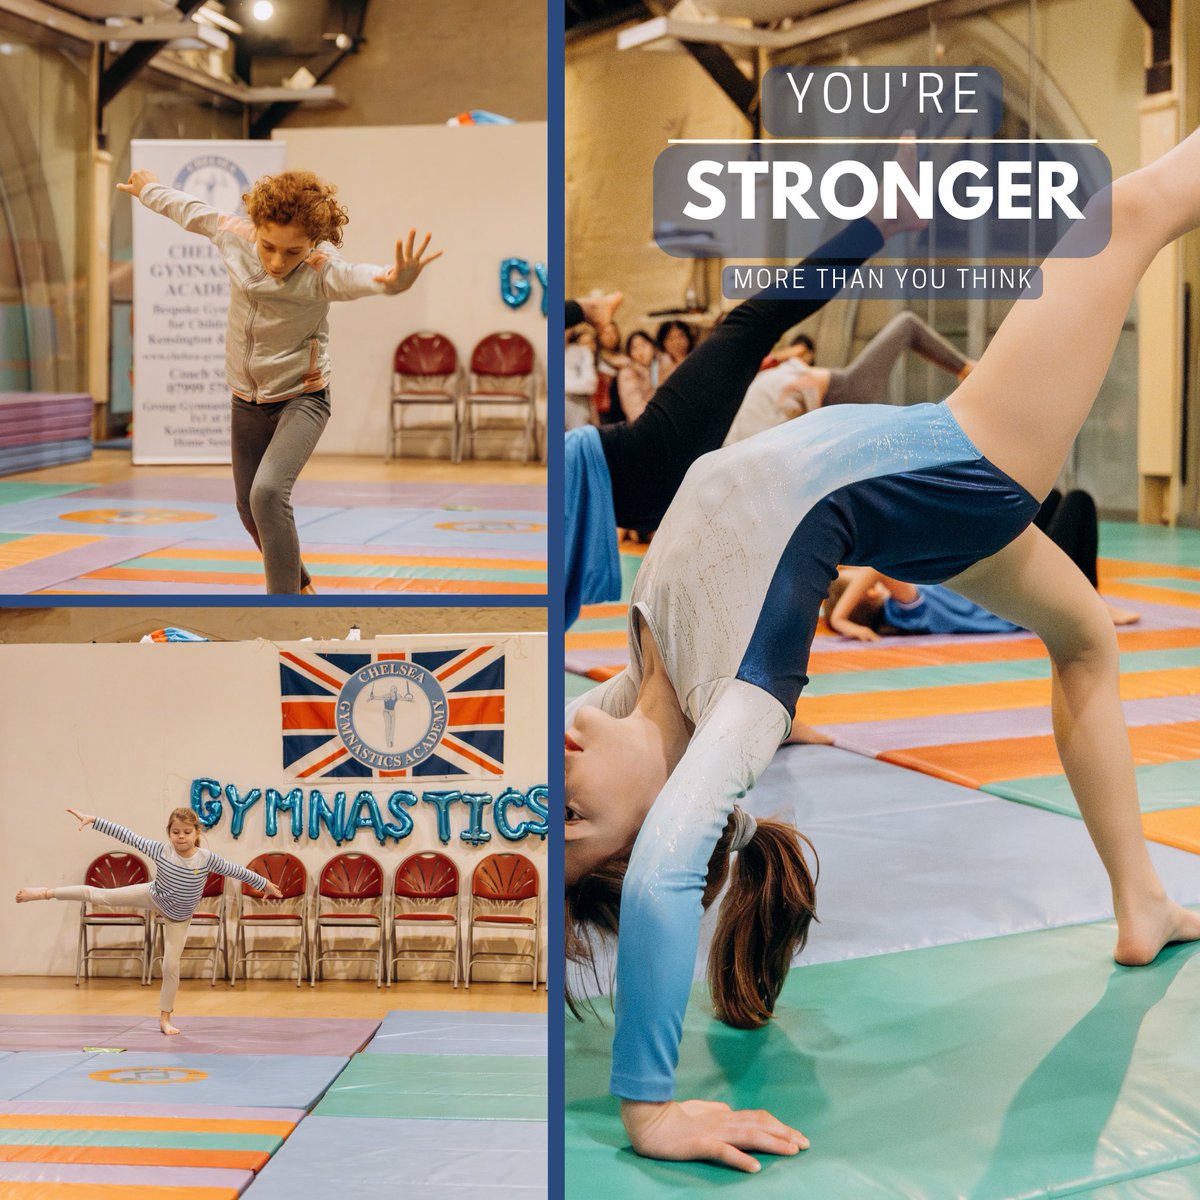 🤸Did you know?
✅ Gymnasts are amongst the strongest athletes in the world 🙌
#gymnastics #gymnasticsforkids #gymnasticsforchildren #chelseagymnastics #gymnasticsinchelsea #kensingtongymnastics #gymnasticsinkensington